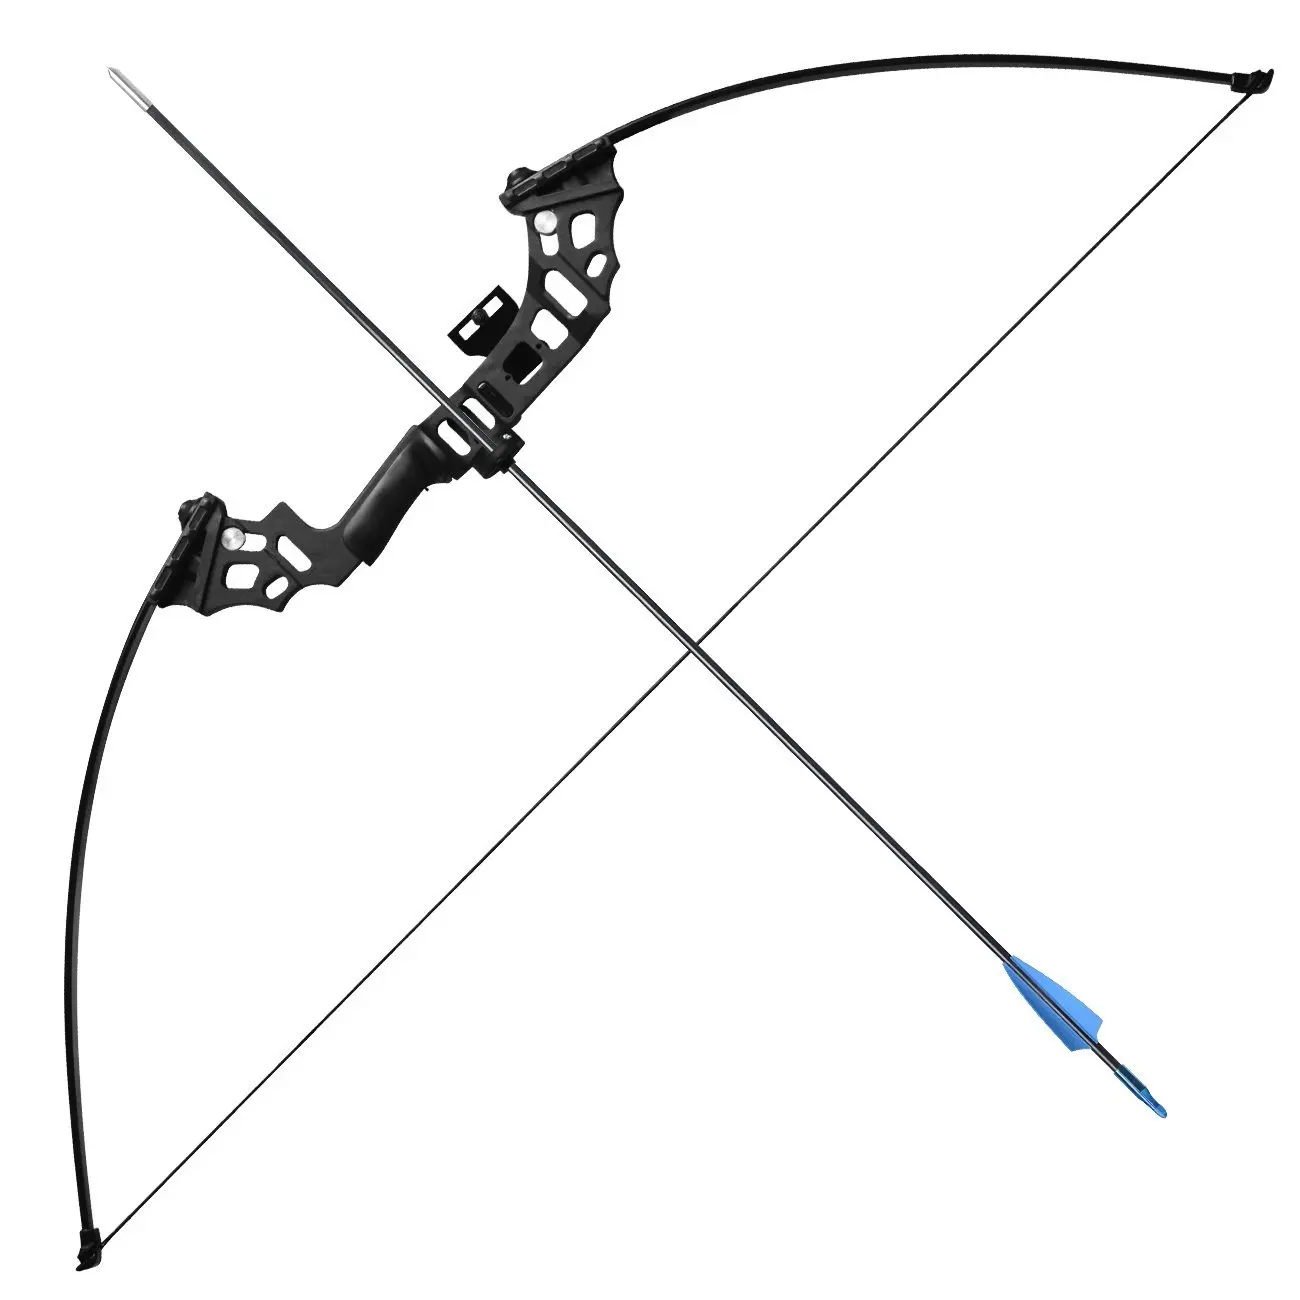 archery equipment for sale